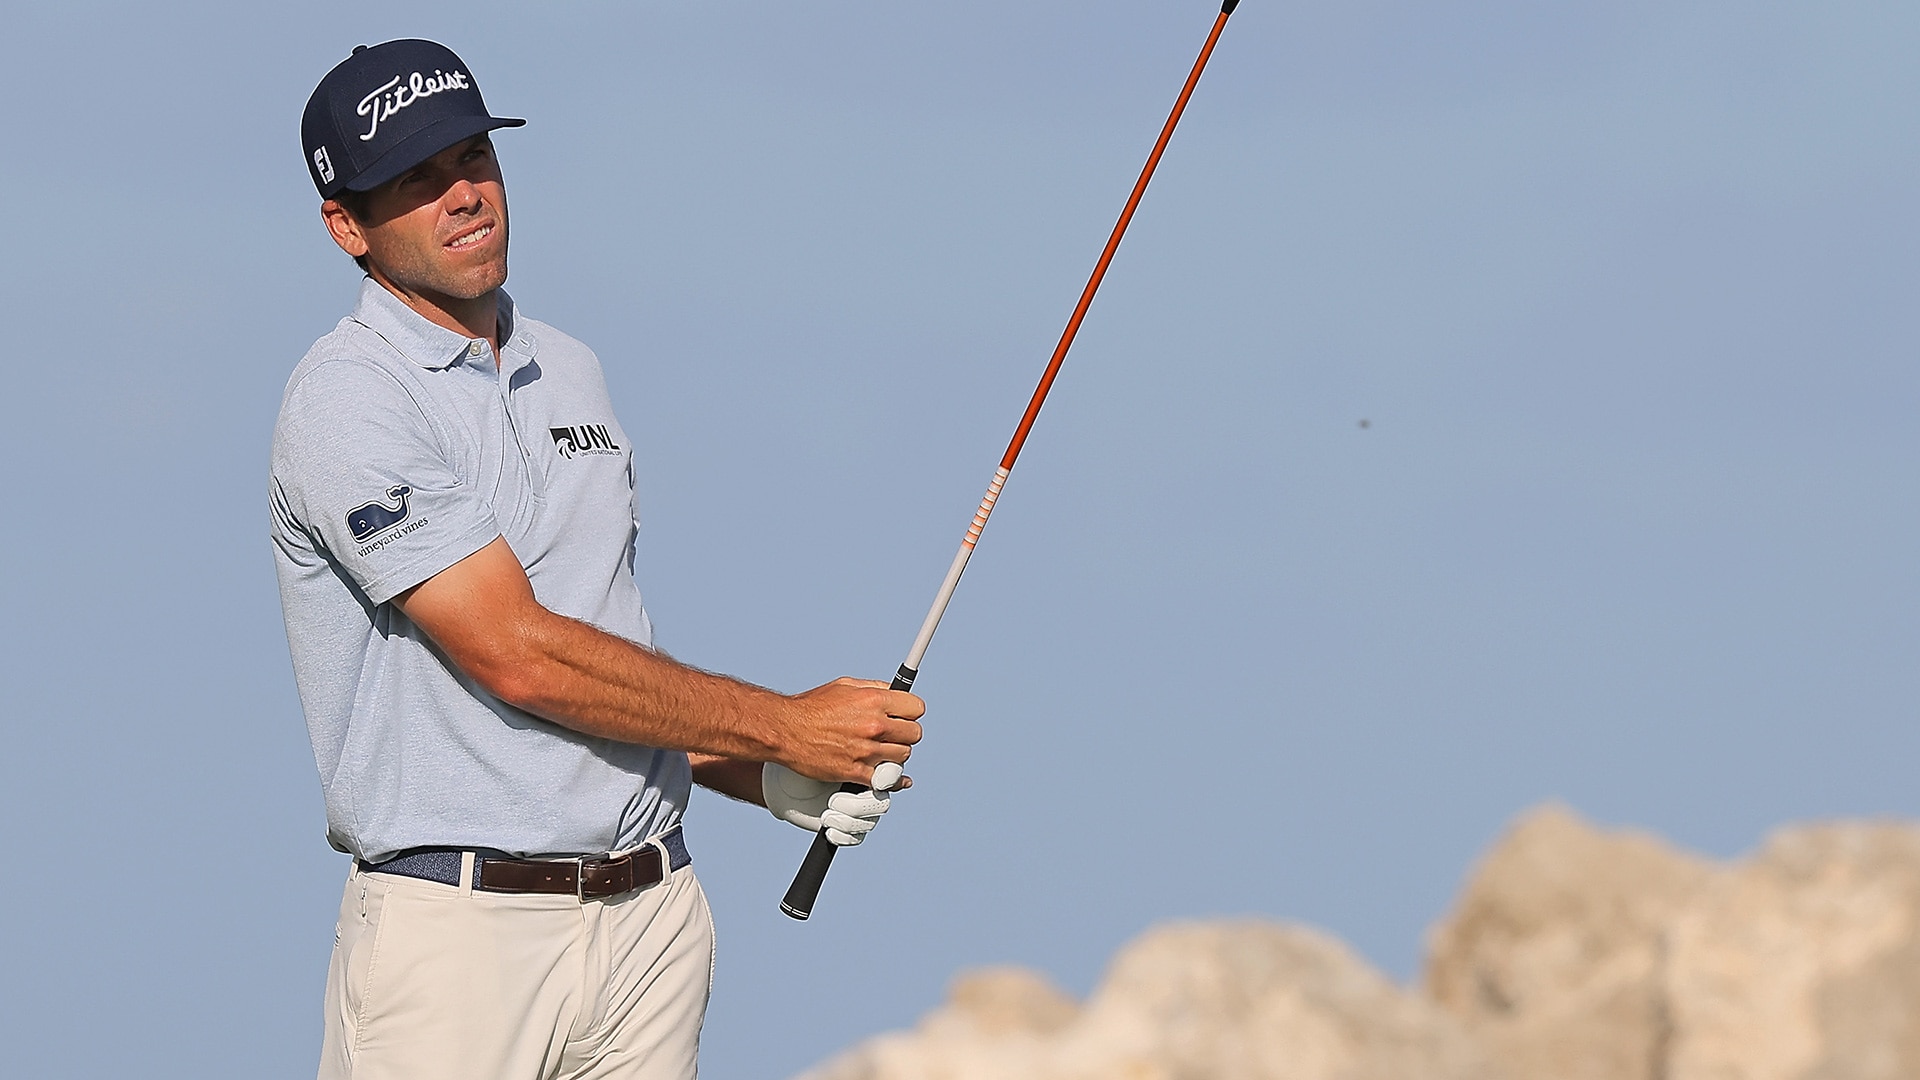 Last year’s runner-up Ben Martin, past champ Brice Garnett tied for lead at windy Punta Cana